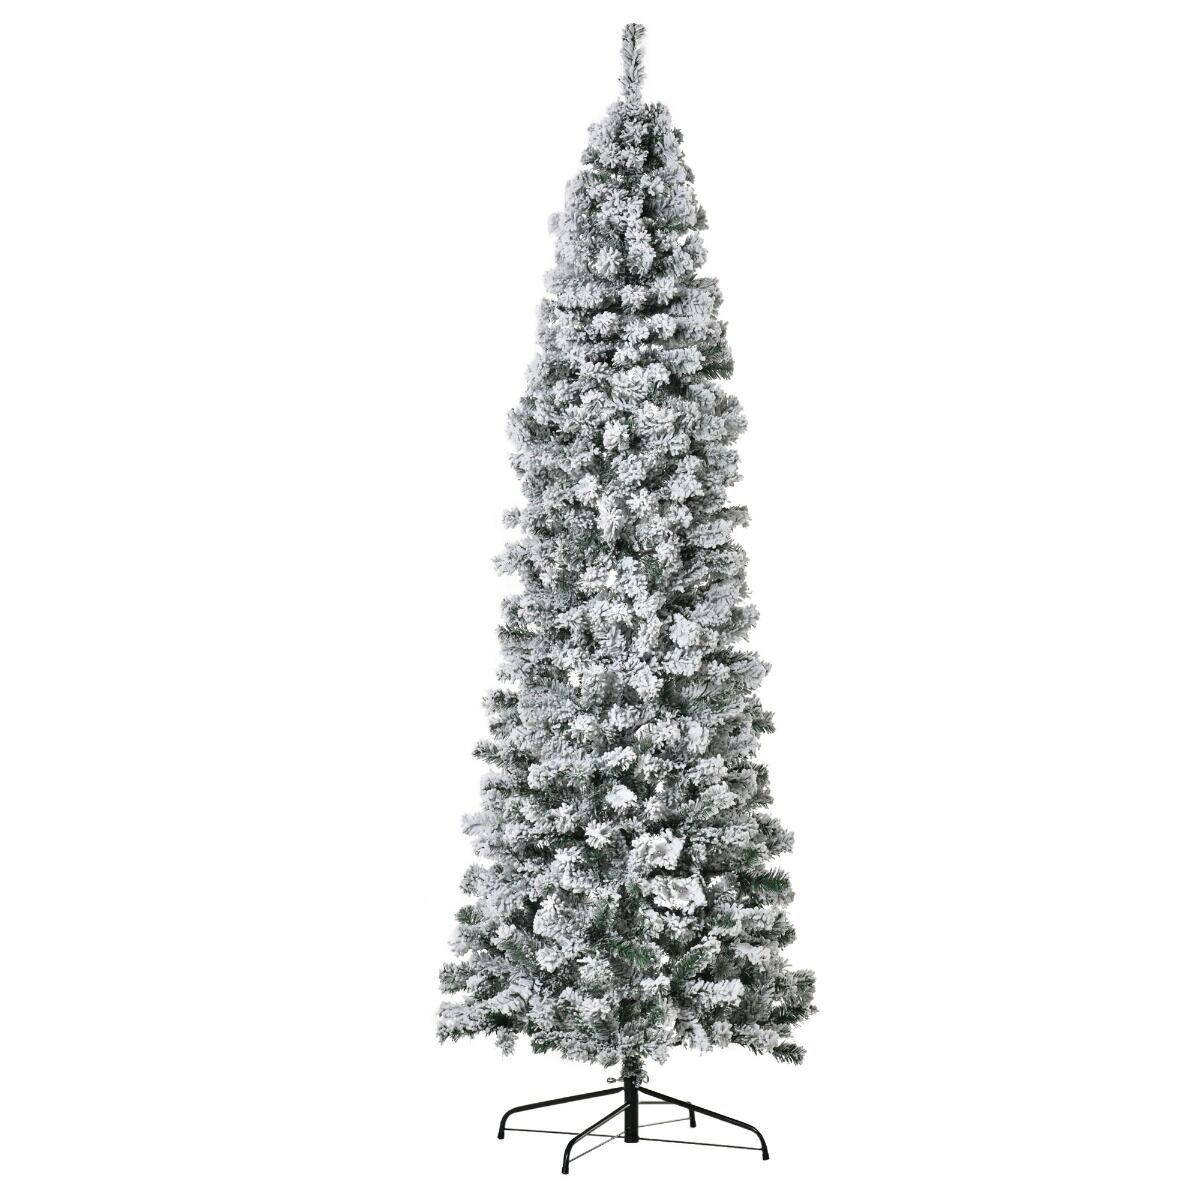 HOMCOM 7.5ft Prelit Artificial Snow Flocked Christmas Tree with Warm White LED Light, Holiday Home Xmas Decoration, Green/White